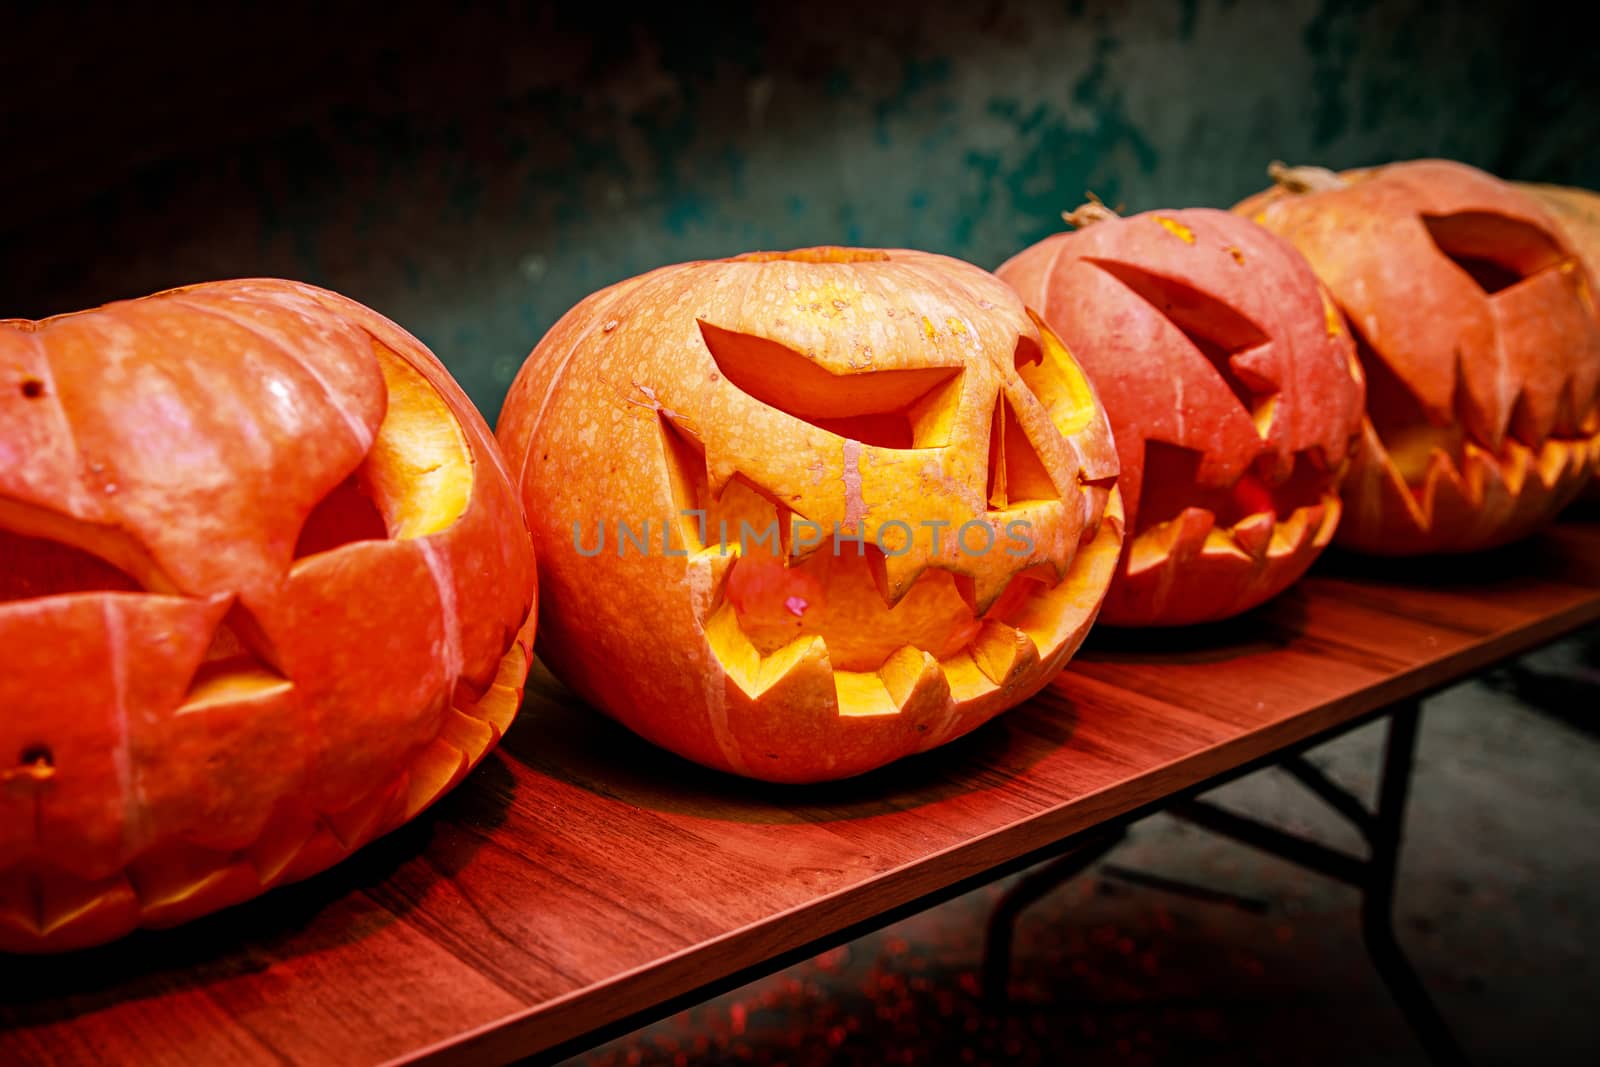 Row of pumpkins for Halloween on wooden table